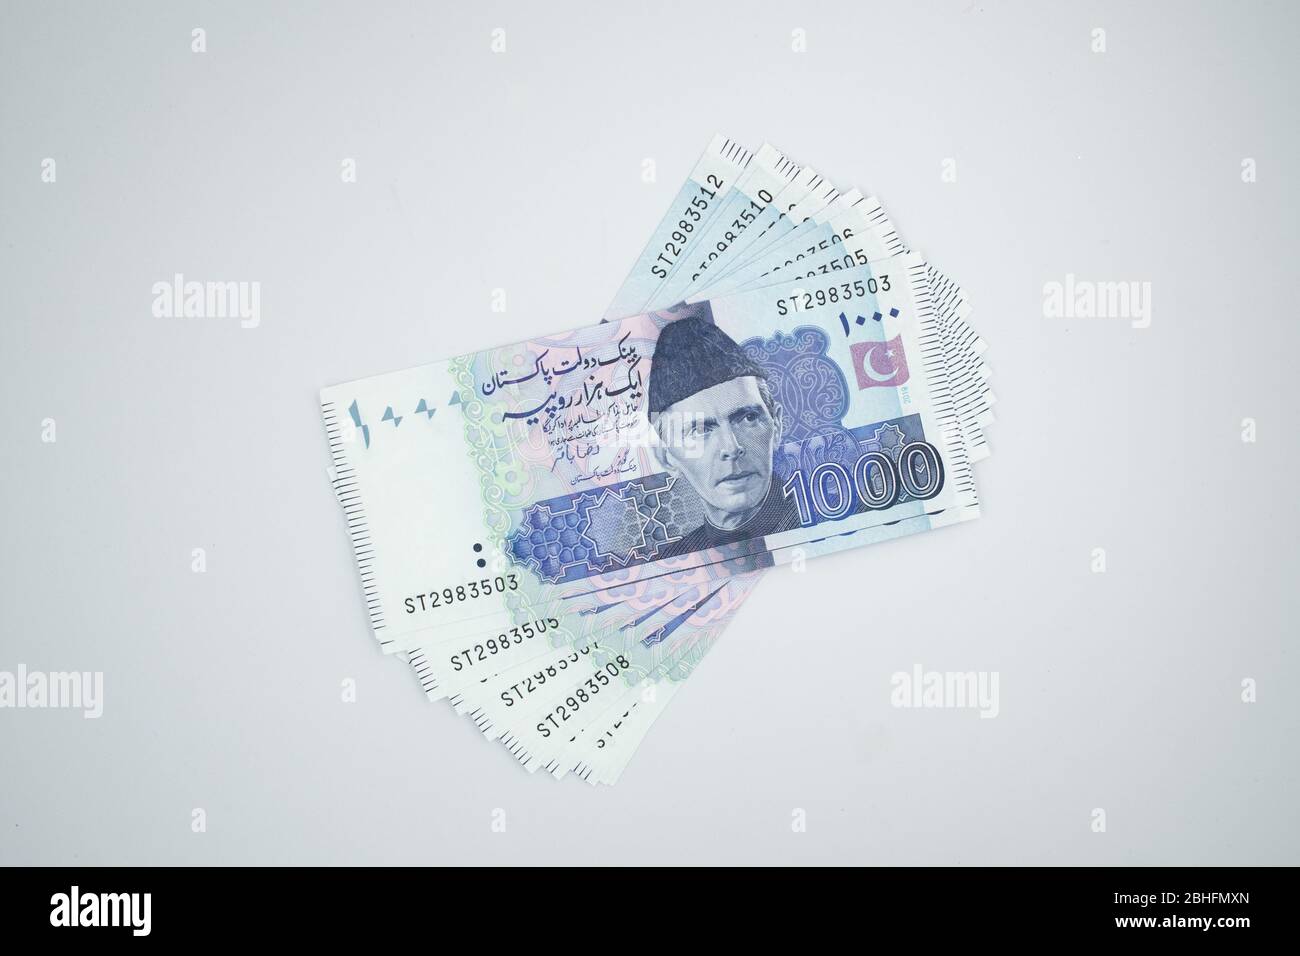 Pakistani Currency, Banknotes, Pakistan Bank Rupees Stock Photo